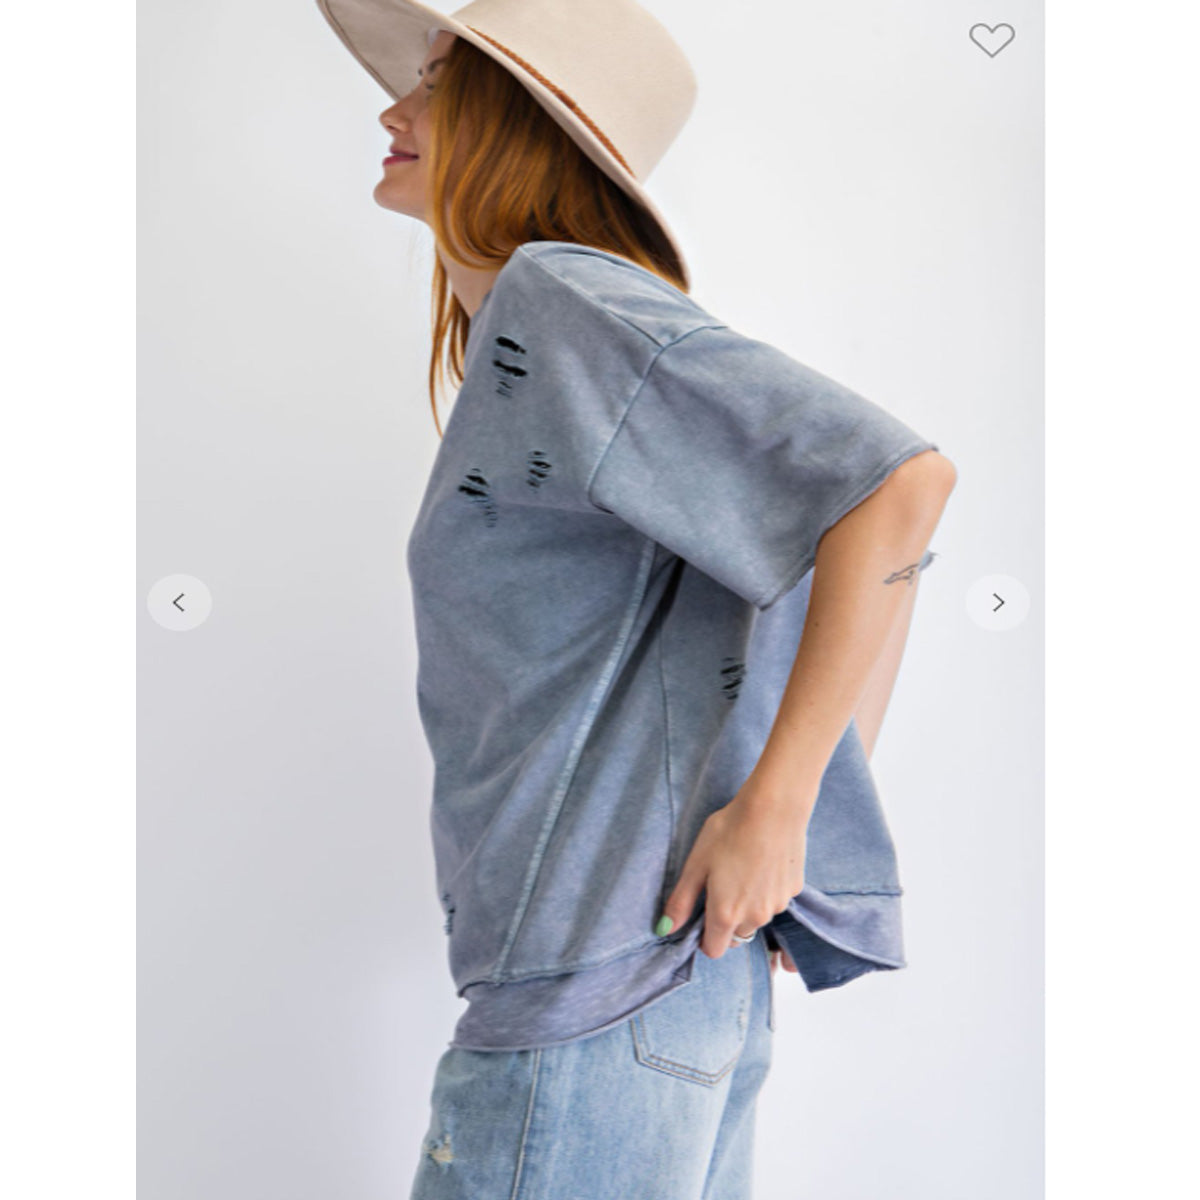 No More Blue Skies Top - Washed Denim - Southern Grace Creations